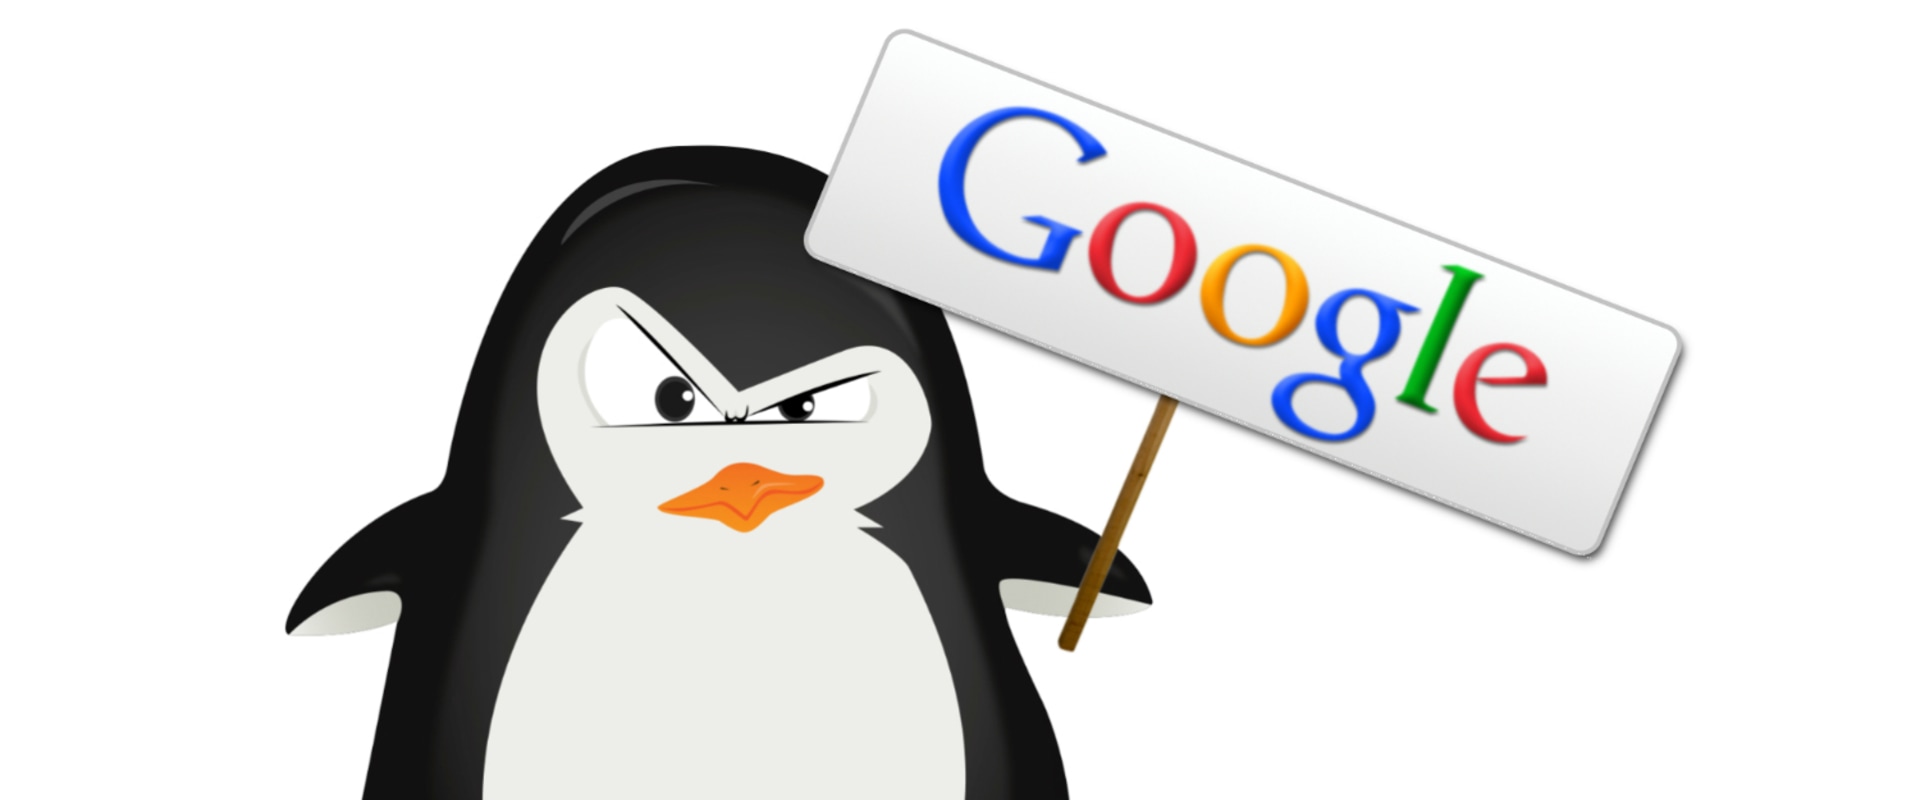 Google Penguin Update: An Overview of Algorithm Changes and Trends